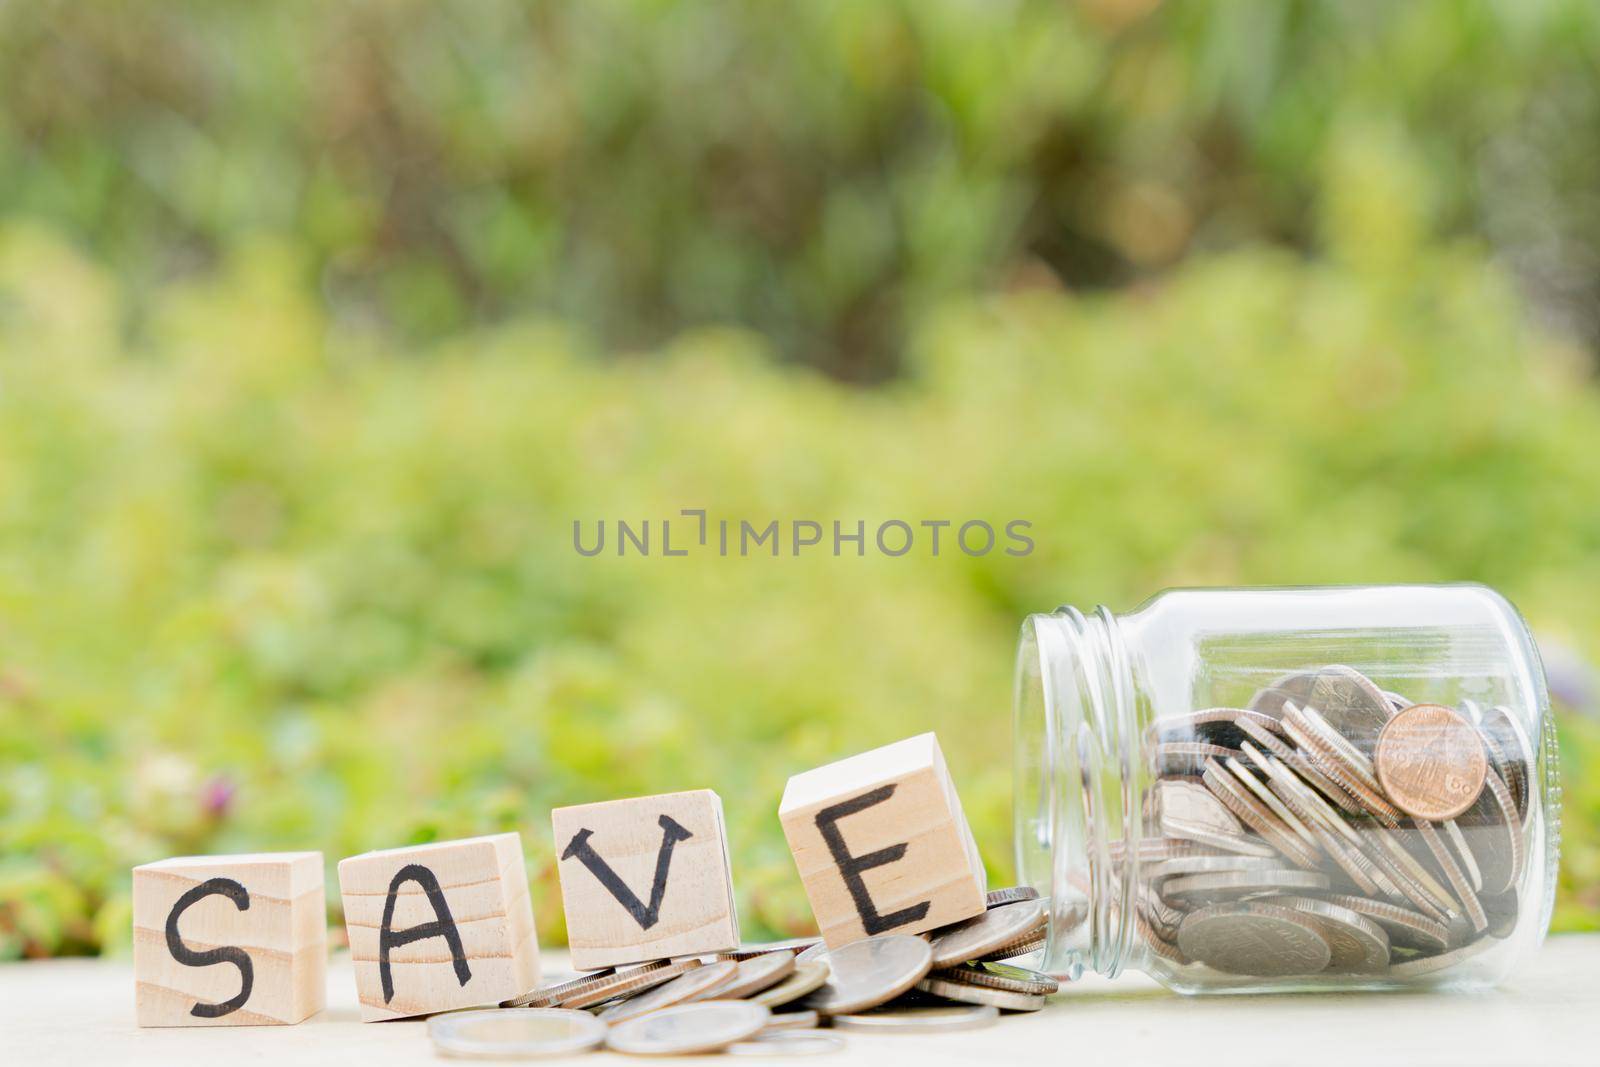 Save word on wooden block and jar full of coins on blurred green natural background. Saving money and investment concept. by mikesaran